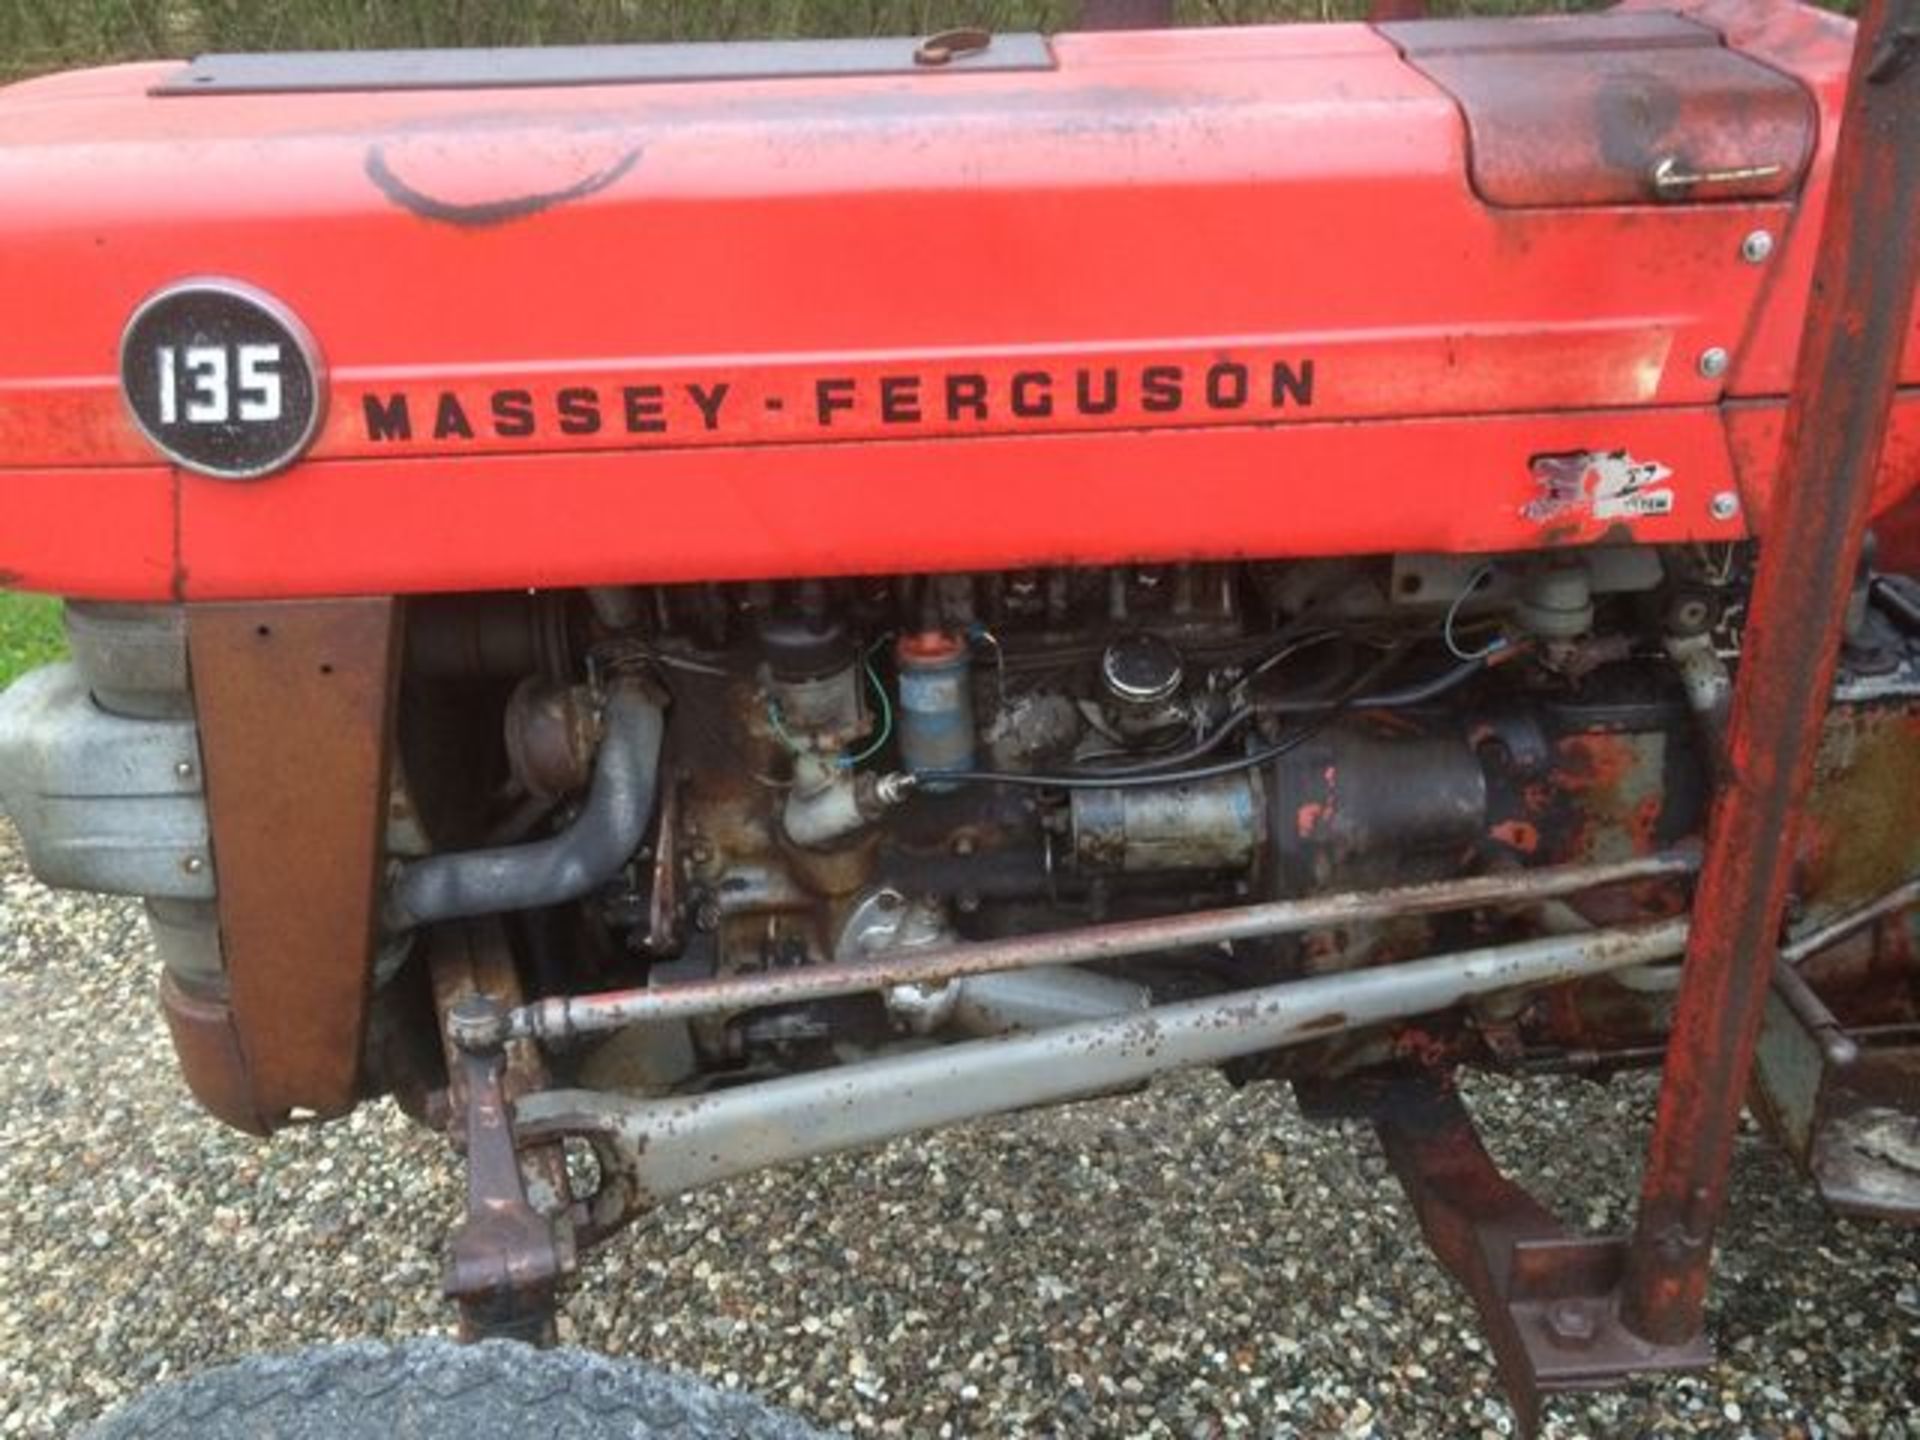 MASSEY FERGUSON Age unknown production ran between 1965 and 1975 this example shows 5506 hours - Image 3 of 12